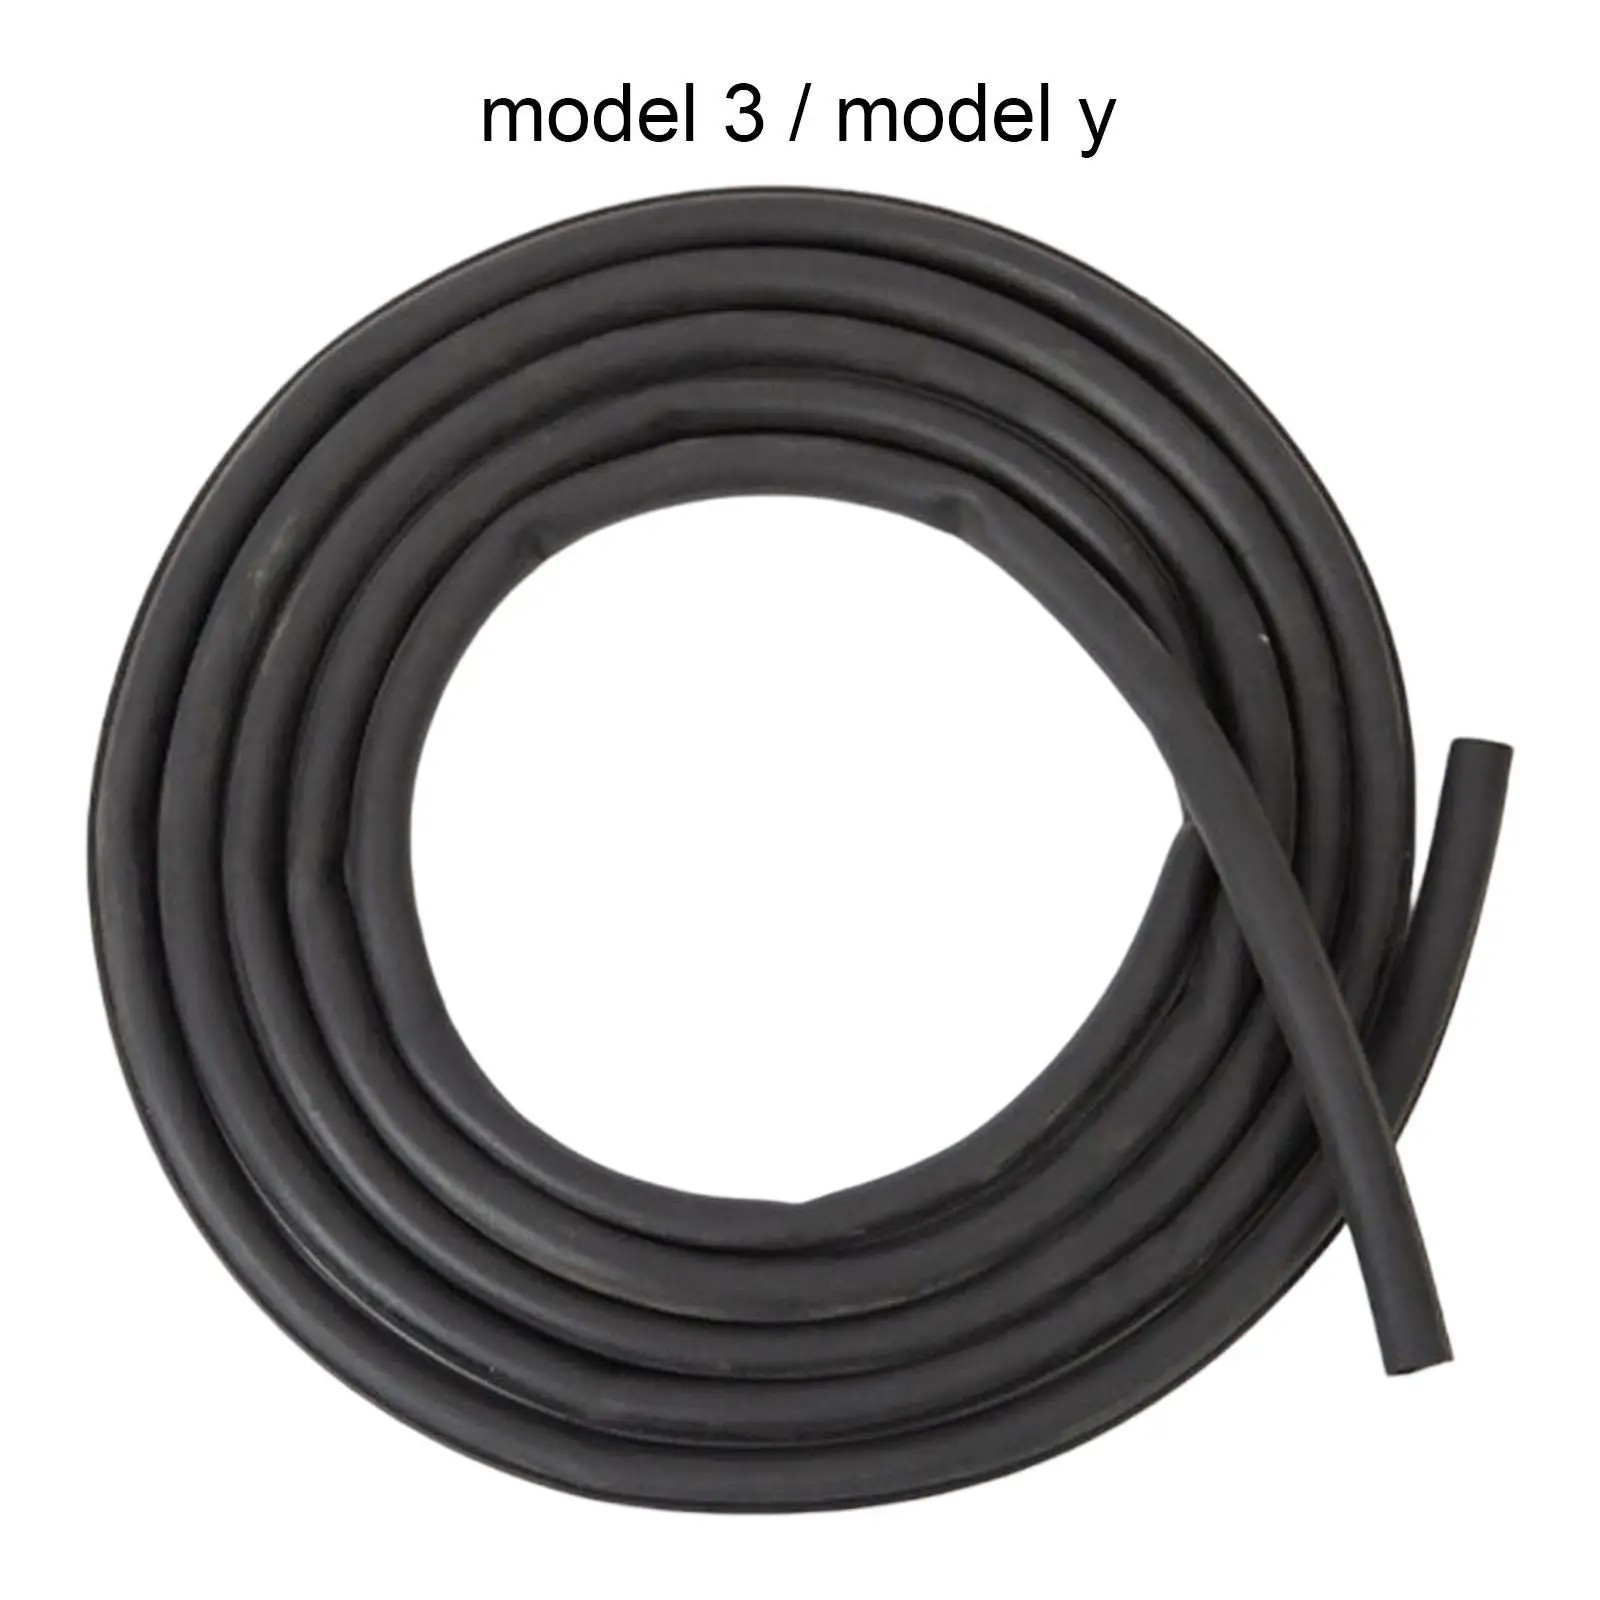 Seal Strip Weatherstrip Easy to Install Weather Stripping Fit for Model 3/Y